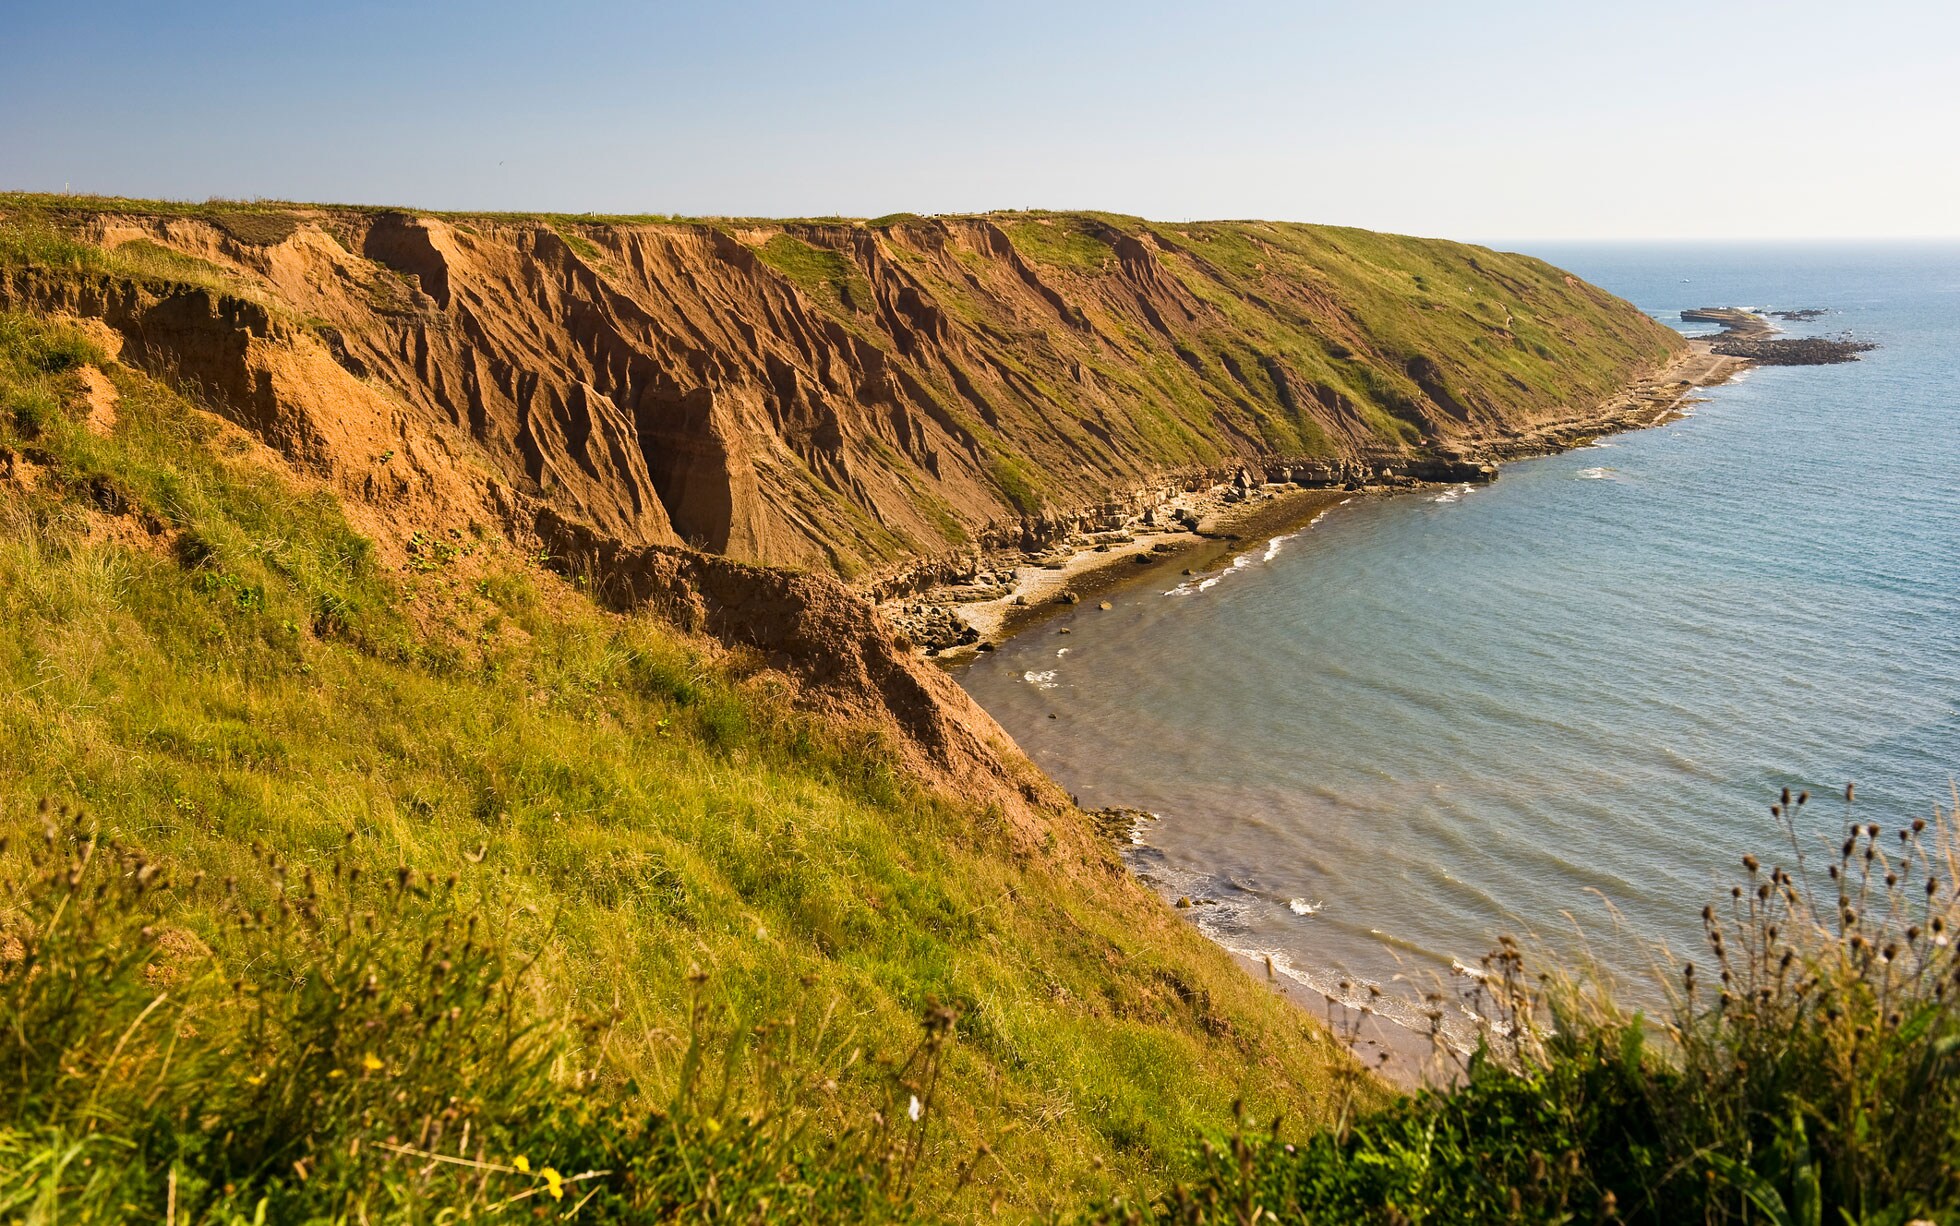 Yorkshire's Stunning Coastline - A Taxi Trip to the Beaches